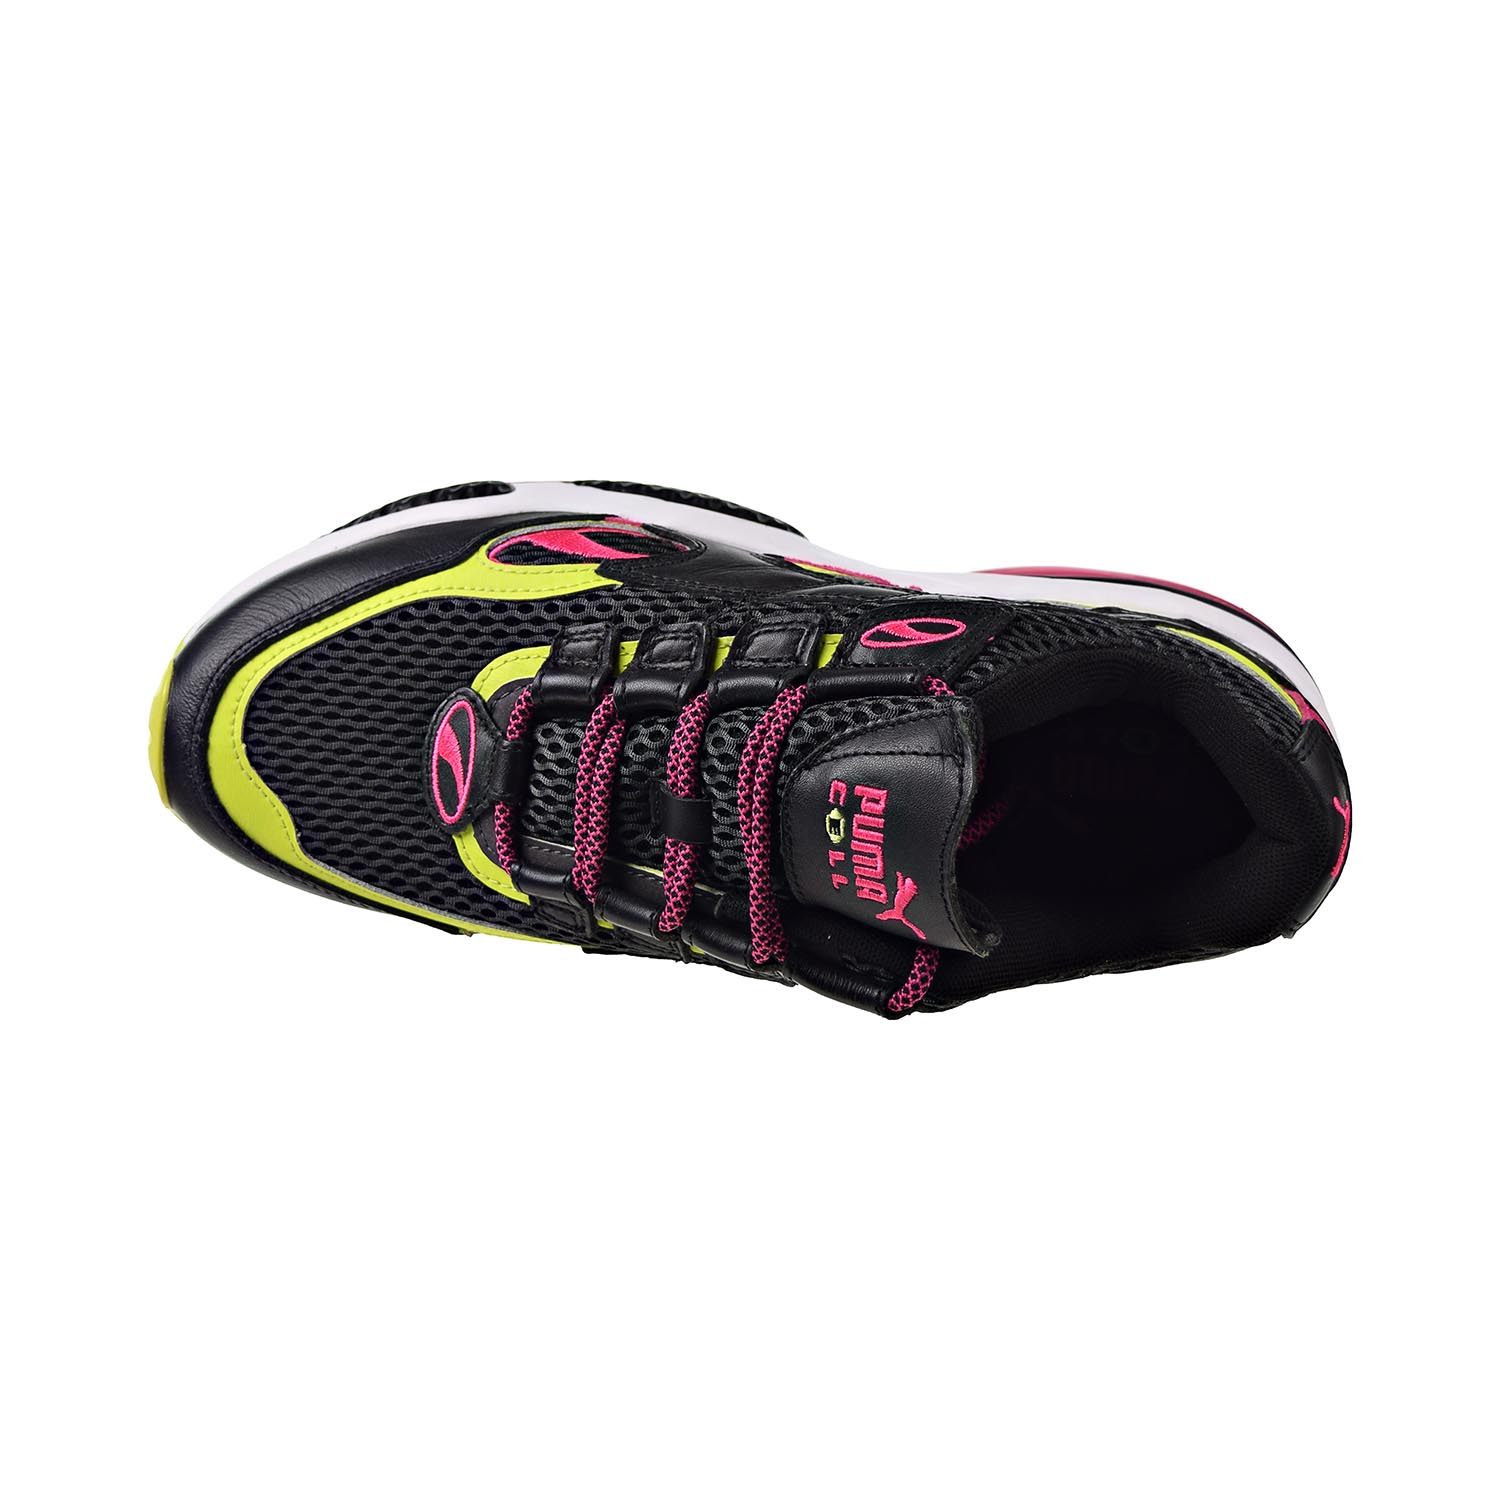 Puma Cell Venom 370417-01 Men Black/Pink/Lime Punch Athletic Running Shoes C1385 (11) - image 5 of 6